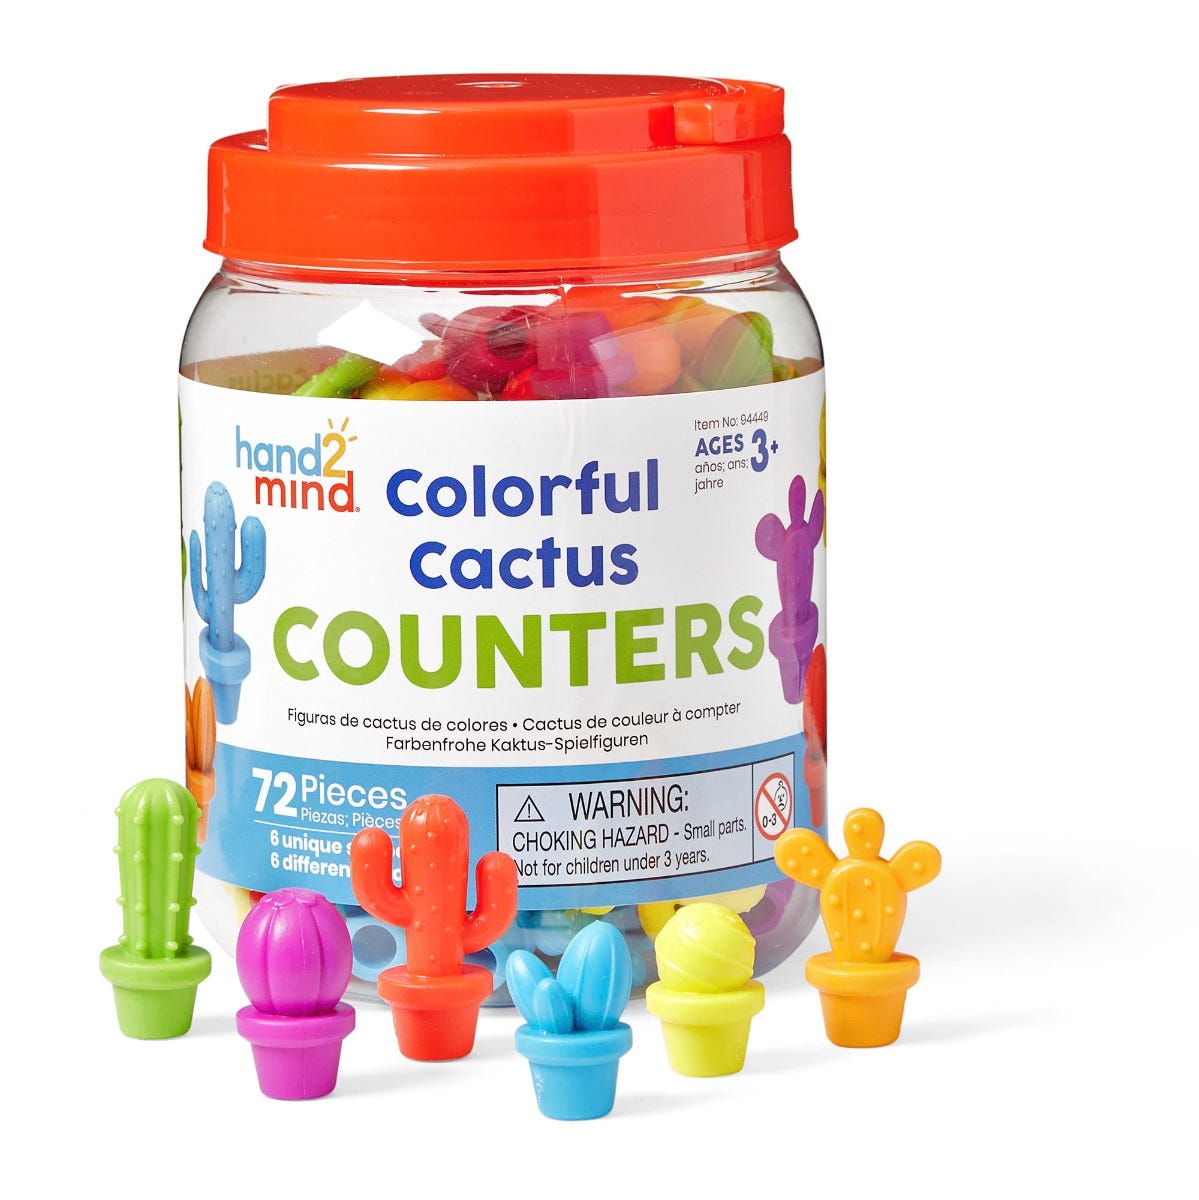 Colourful Cactus Counters, Use this set of 72 Colourful Cactus Counters for a variety of early years maths activities including counting, grouping, patterning, sorting, adding, subtracting, and more. The Colourful Cactus Counters come in 6 unique shapes and 6 unique colours, and are ideal for the classroom. Count, pattern, sort, group, add, subract, and more with this set of colourful cactus counting toys that are perfect for the classroom. Colourful Cactus Counters This set of tactile cactus toys adds and 